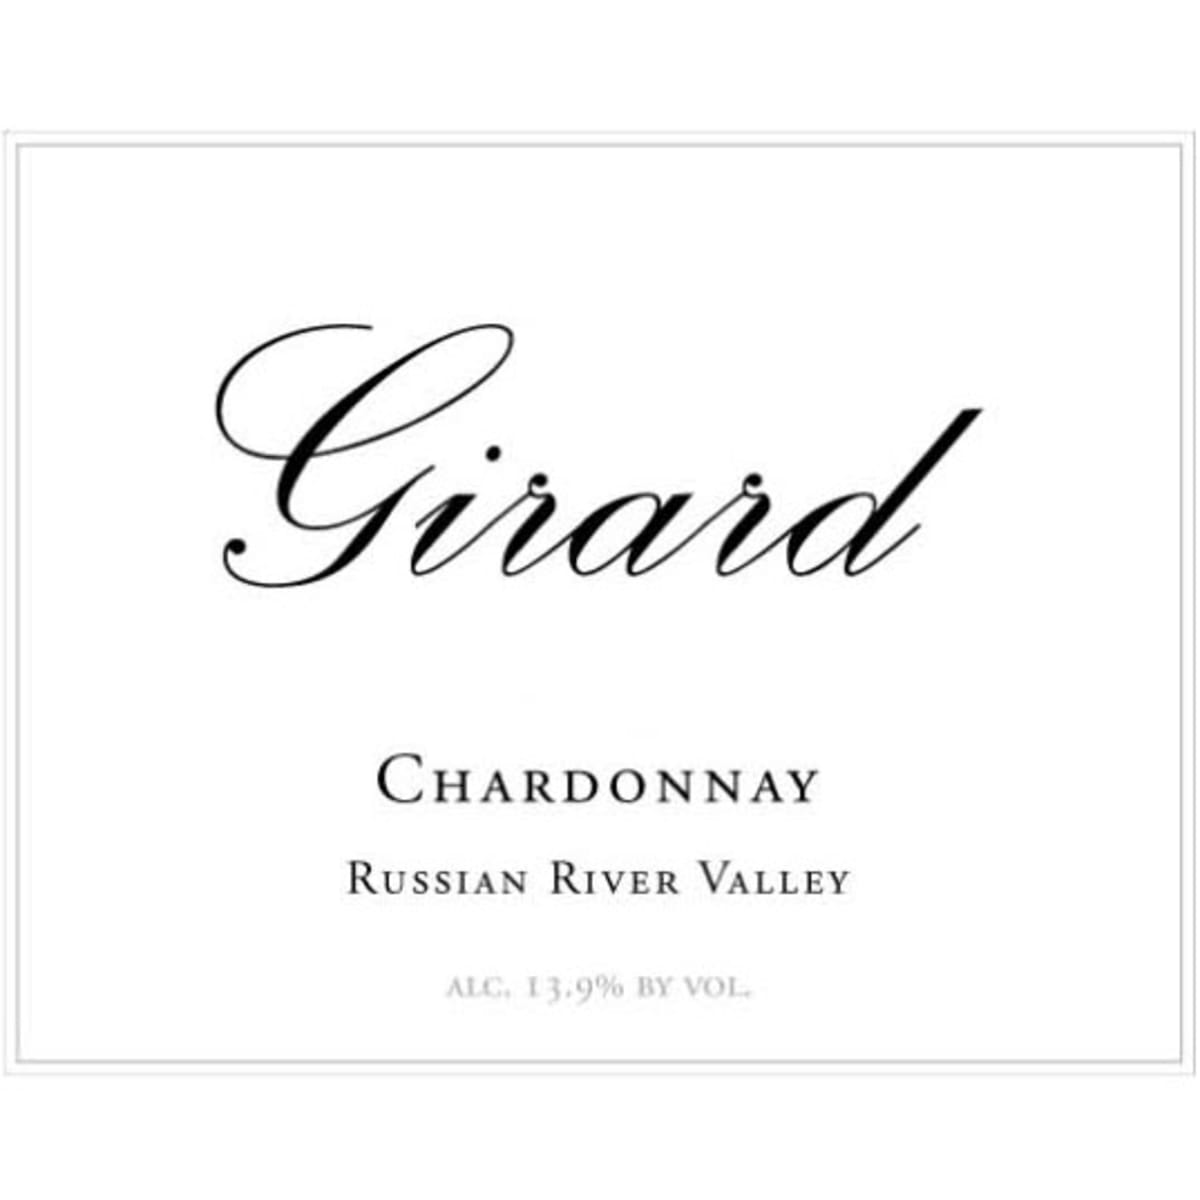 Girard Russian River Chardonnay 2010 Front Label